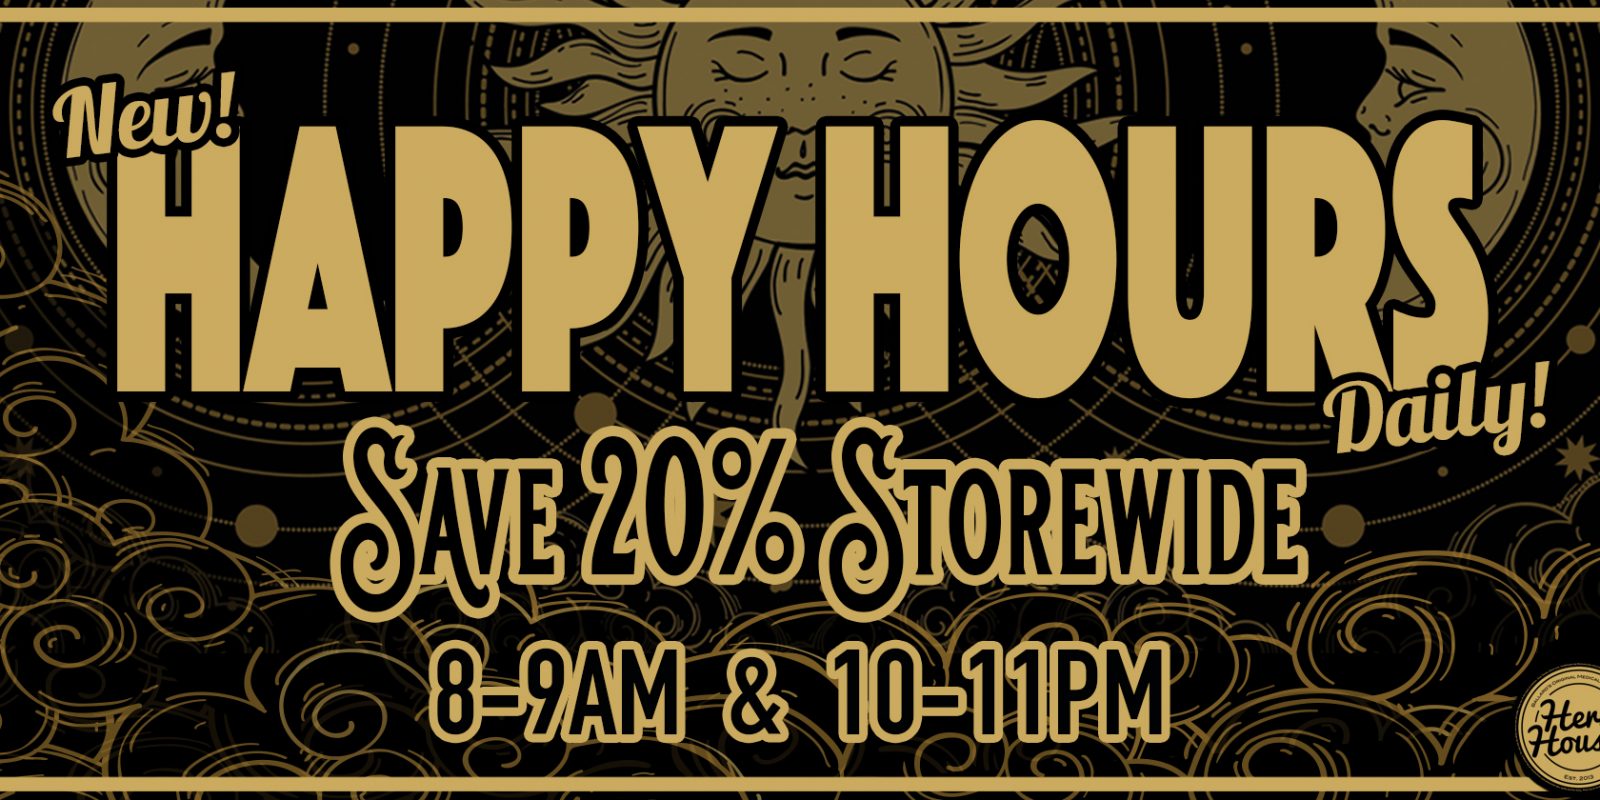 SAVE 20% Happy Hours at Herbs House 8-9am and 10-11pm Daily!!!